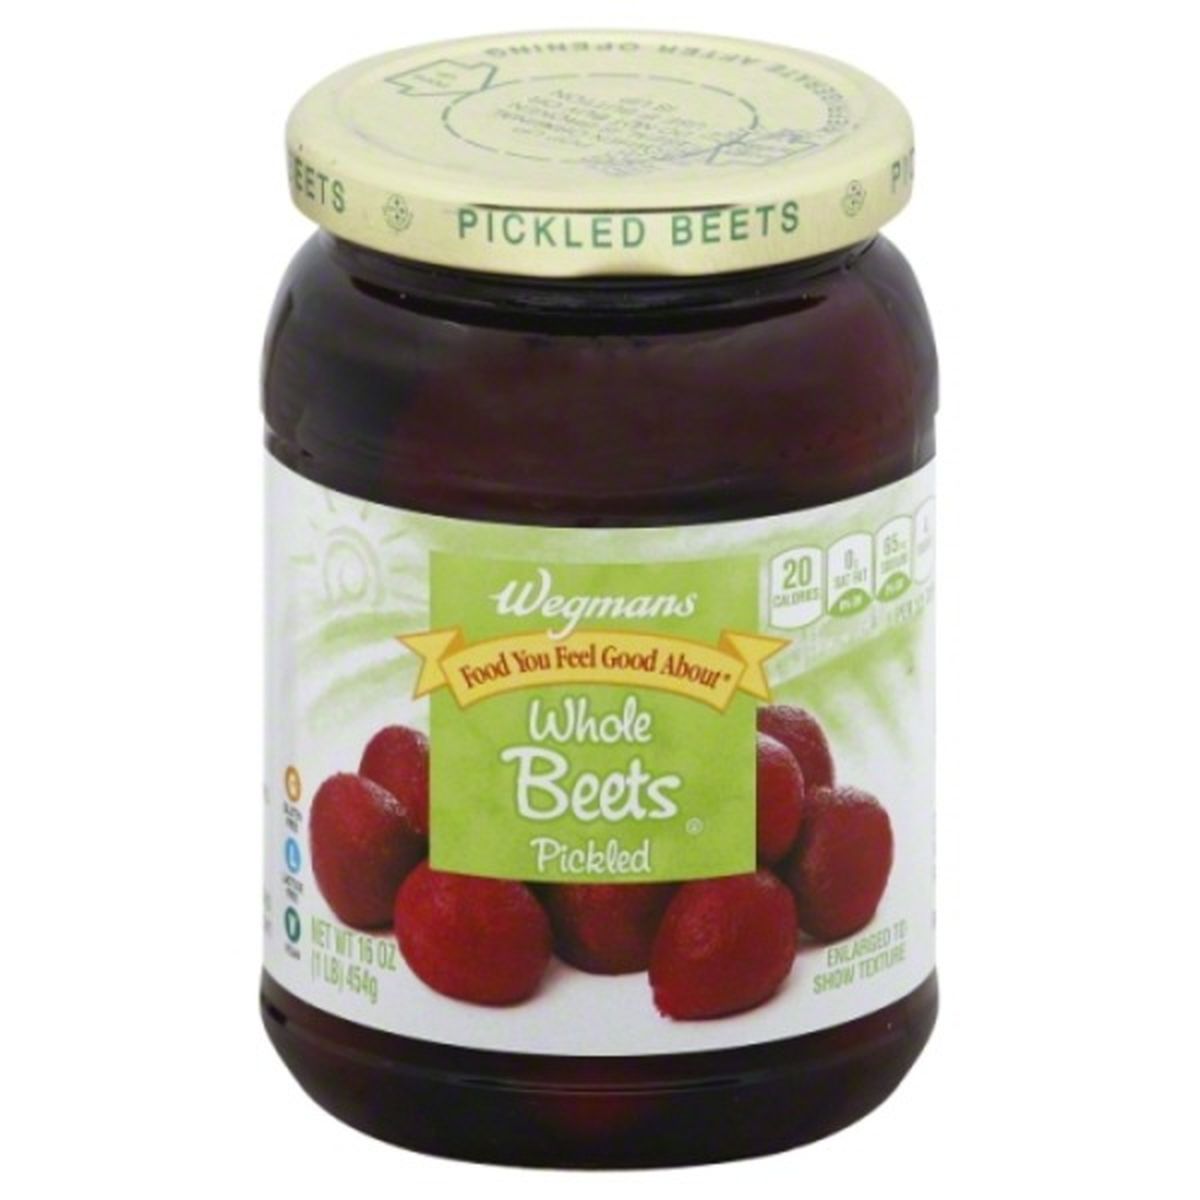 Calories in Wegmans Whole Beets, Pickled